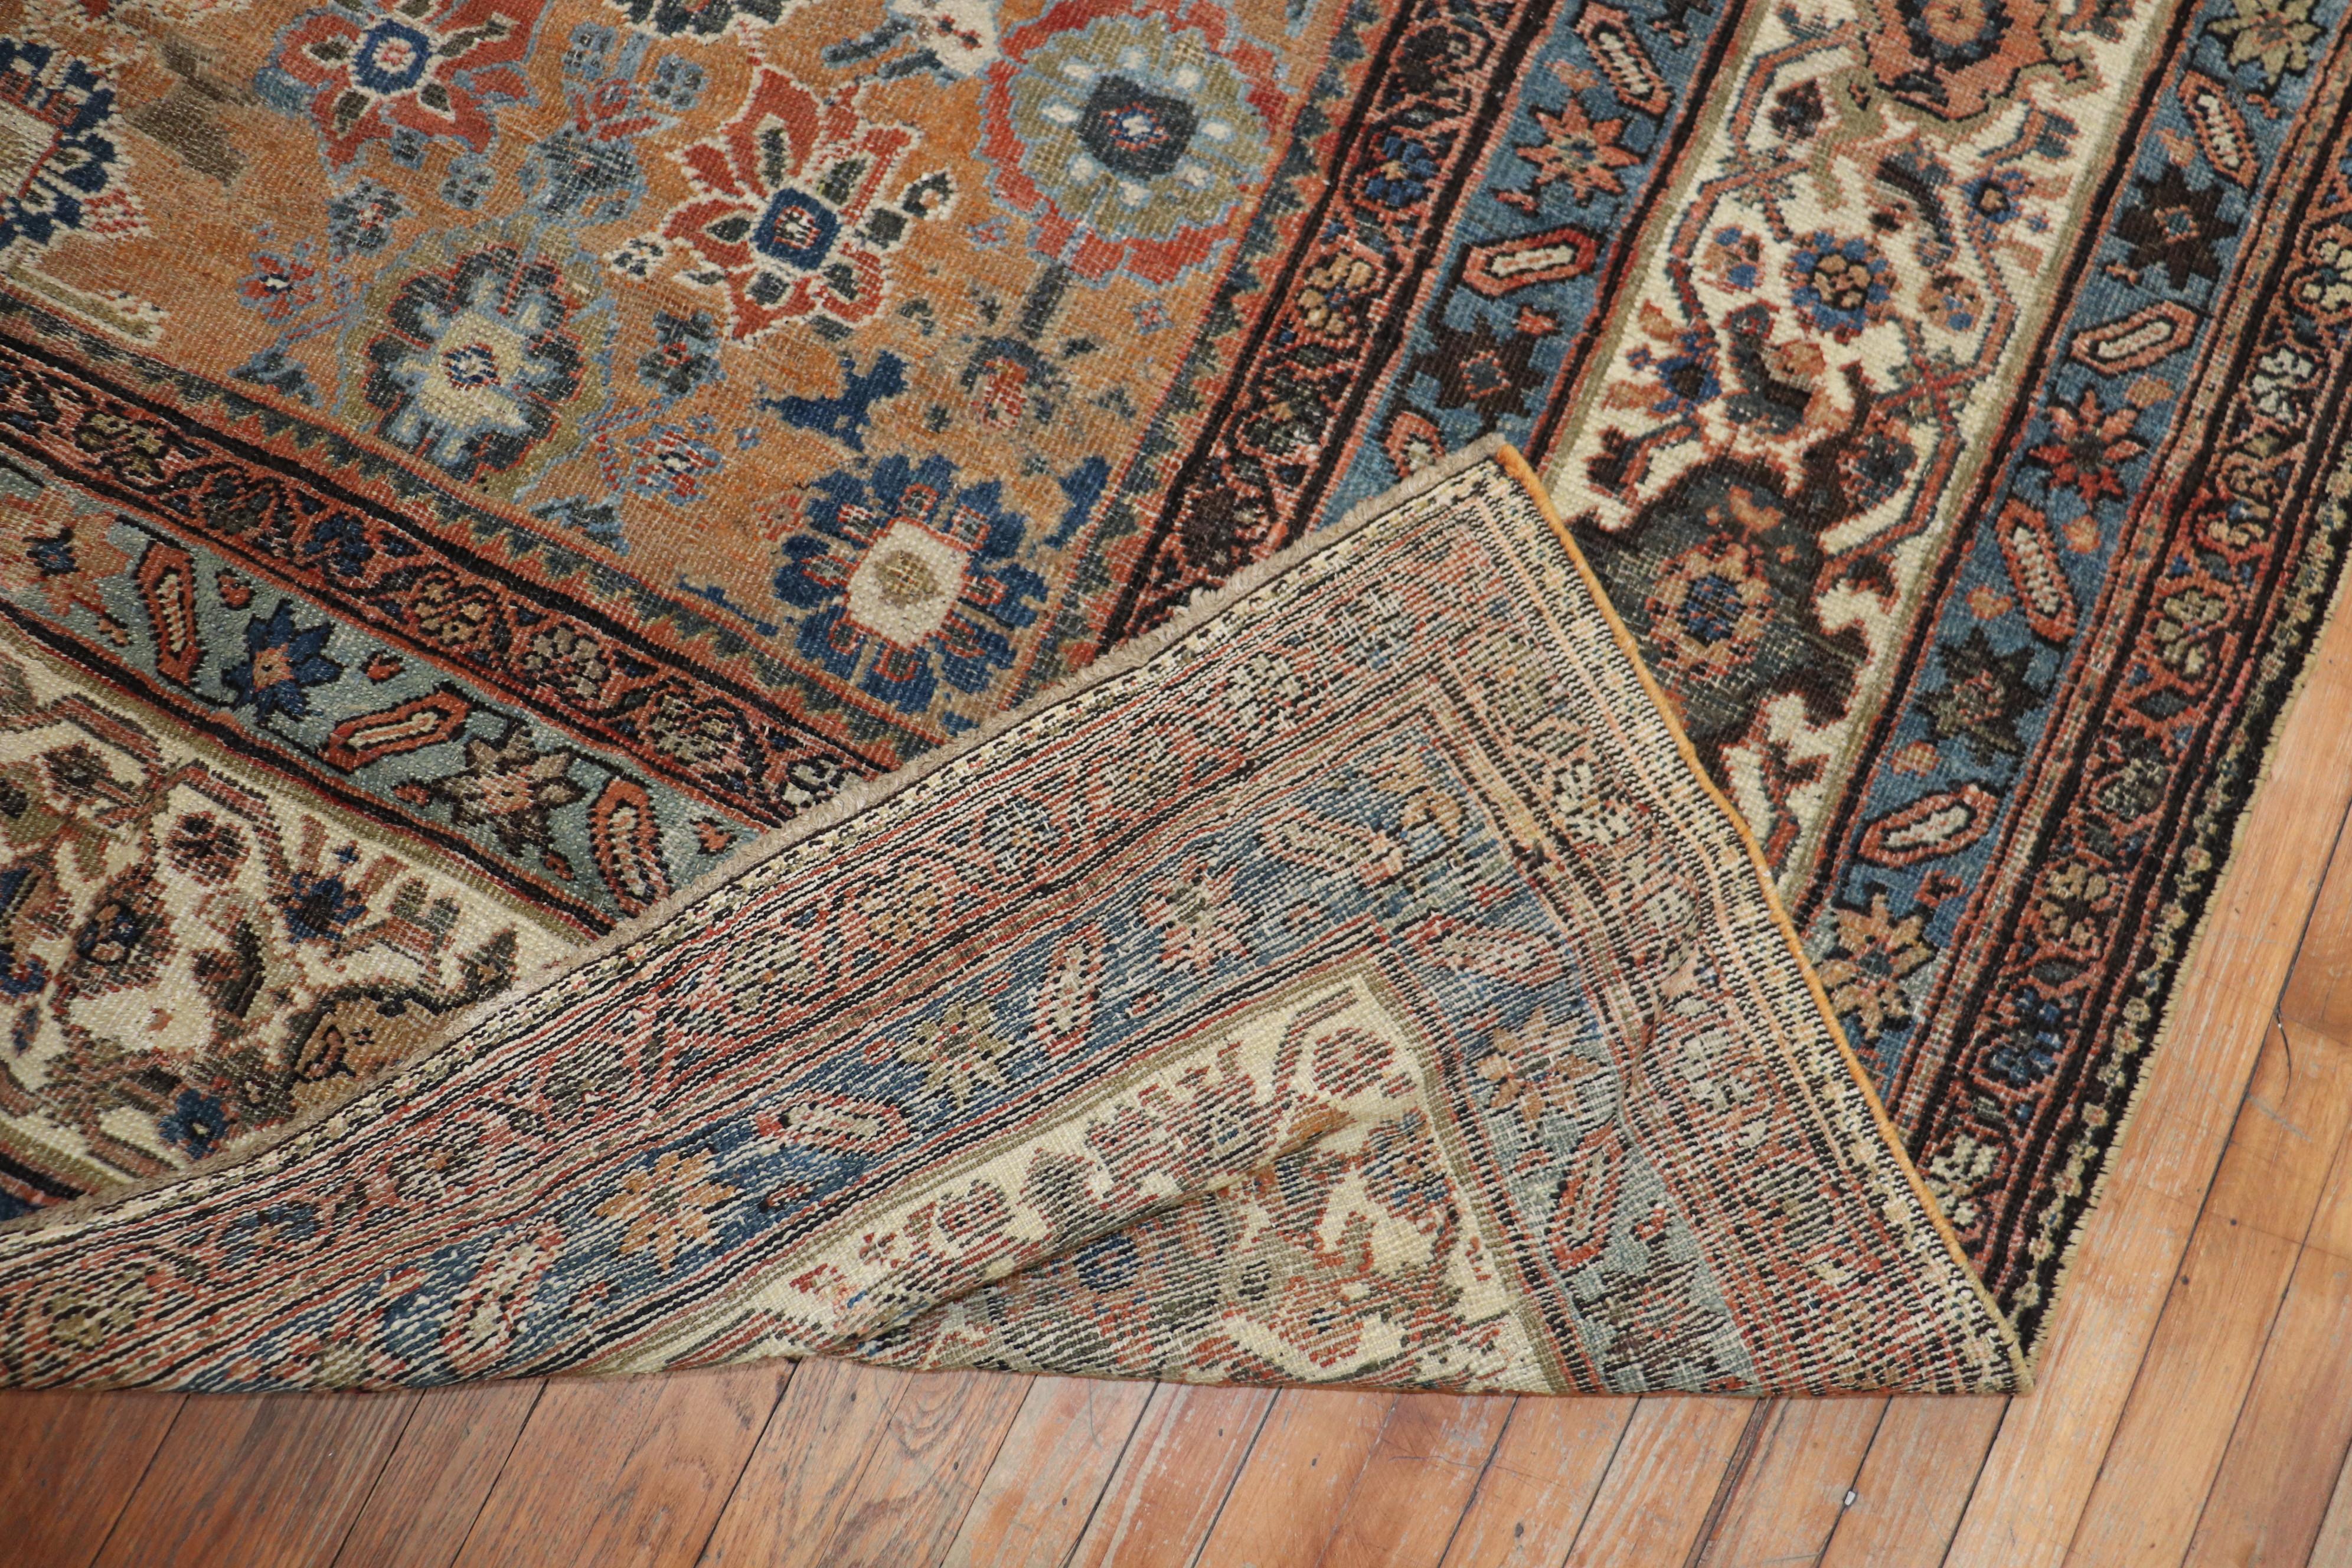 Zabihi Collection Brown Rustic Oversize Antique Persian Mahal Rug im Zustand „Gut“ im Angebot in New York, NY